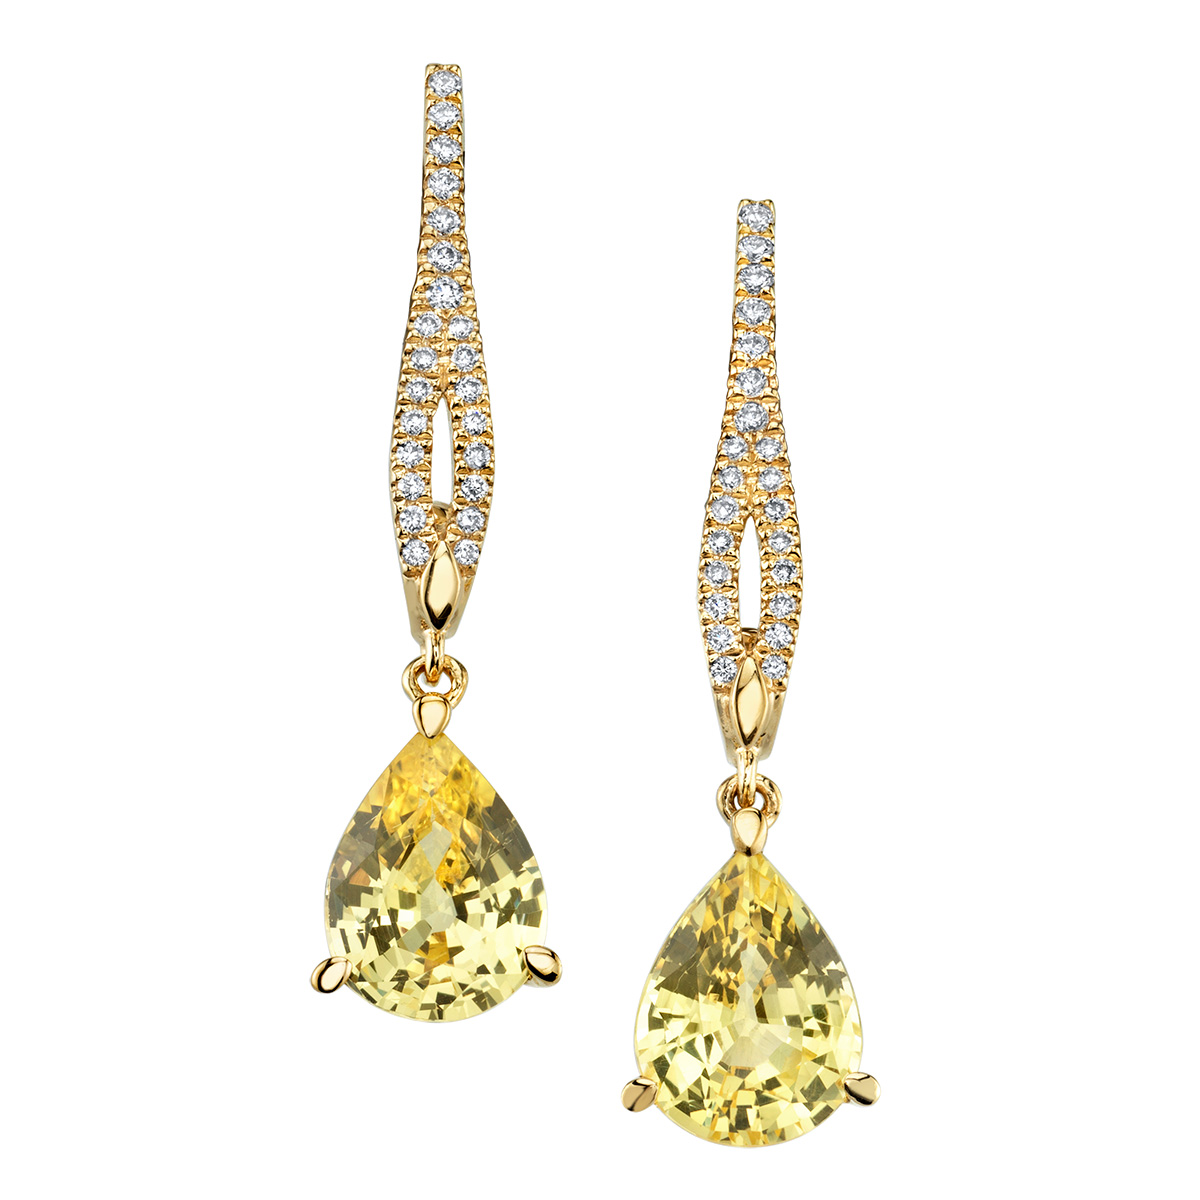 Yellow gold designer diamond and yellow sapphire dangle earrings by Parade Design.